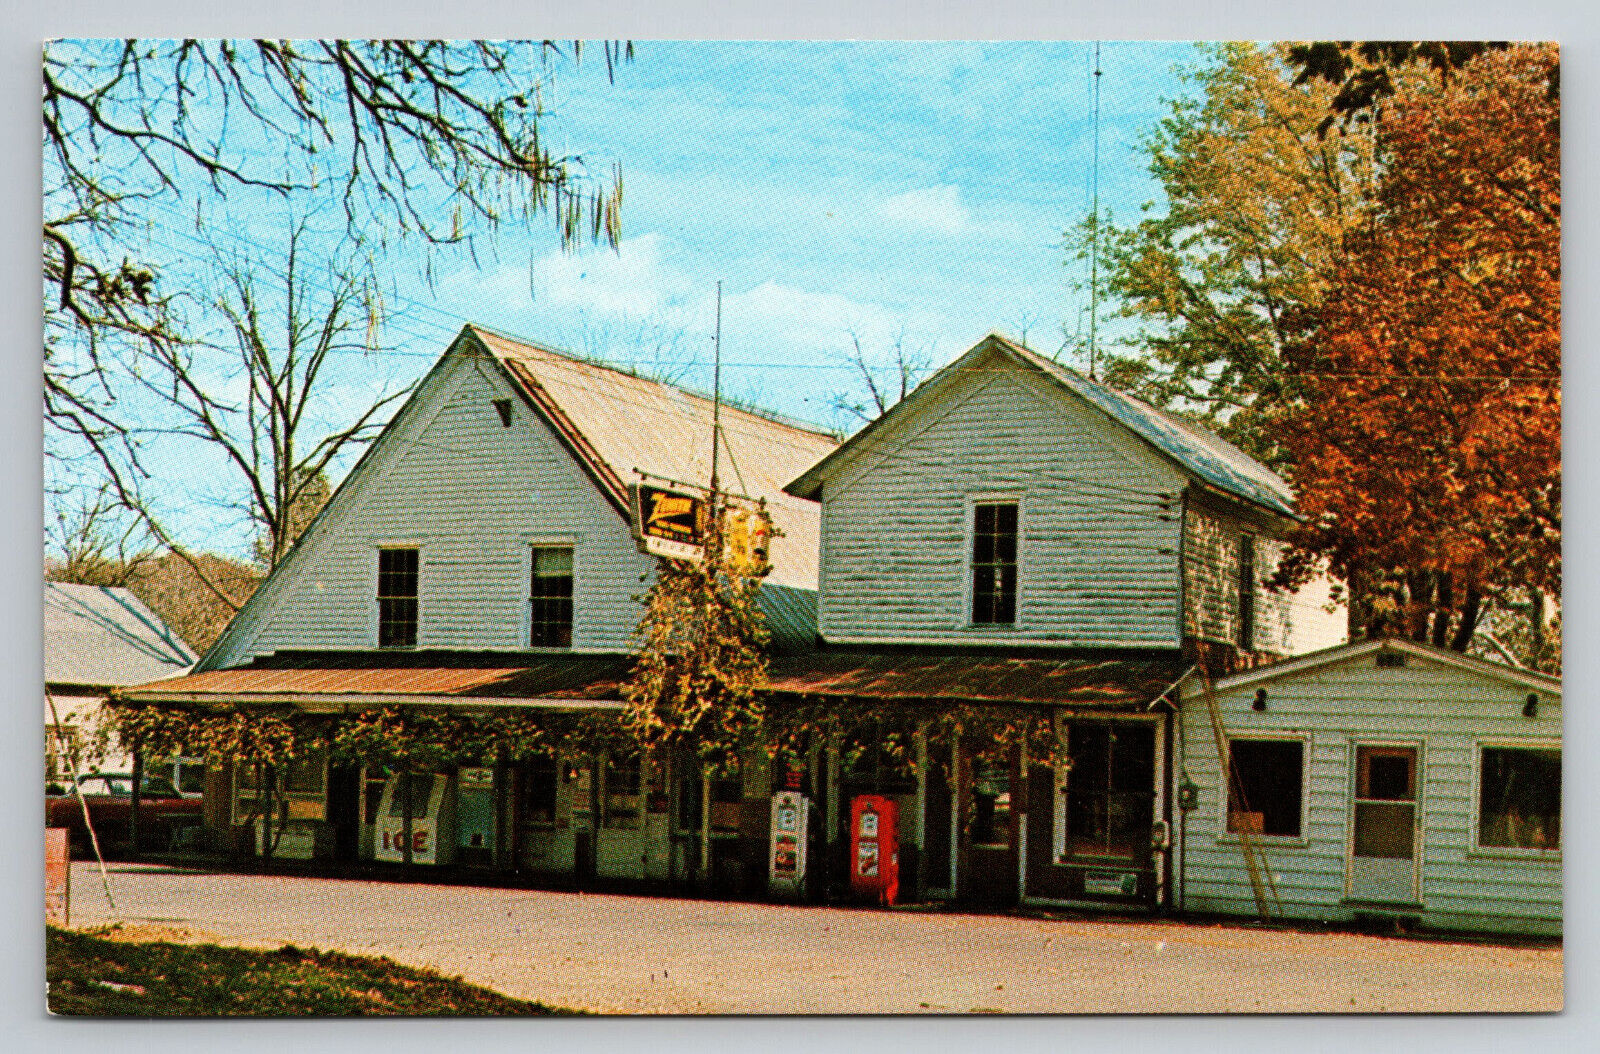 Mansfield Indiana General Store Mill Street View Postcard